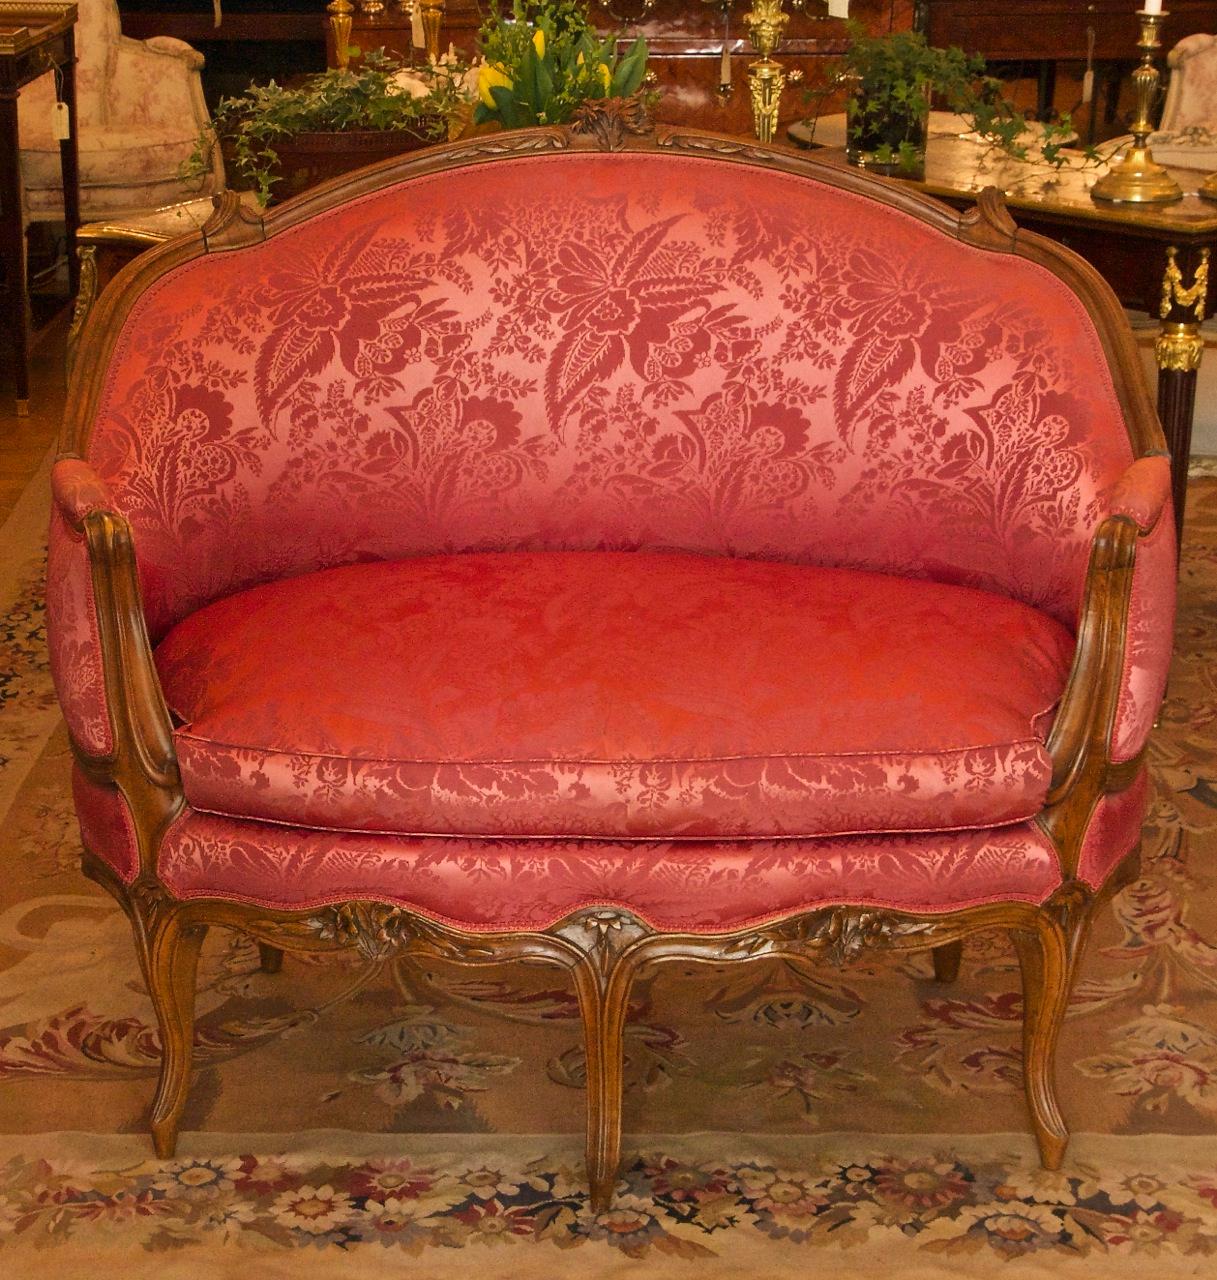 18th century French Louis XV carved walnut red silk settee 'Canape en Corbeille'

An 18th century Louis XV carved walnut settee 'canapé en corbeille' attributed to Pierre Nogaret (1718 - August 23, 1771). The padded back with a cresting centred by